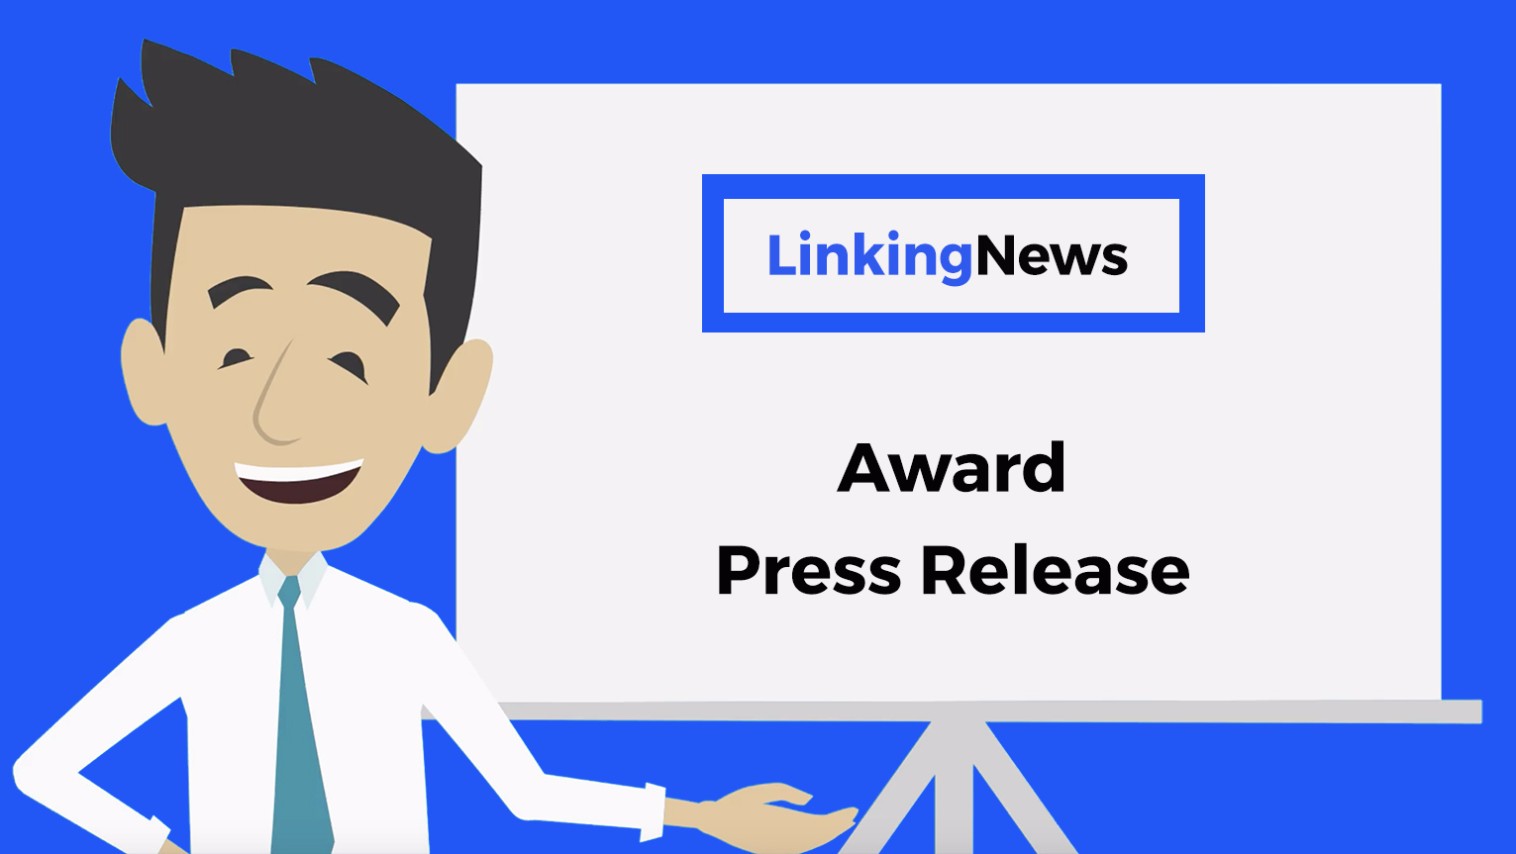 Linking News - How To Write A Press Release For Winning An Award